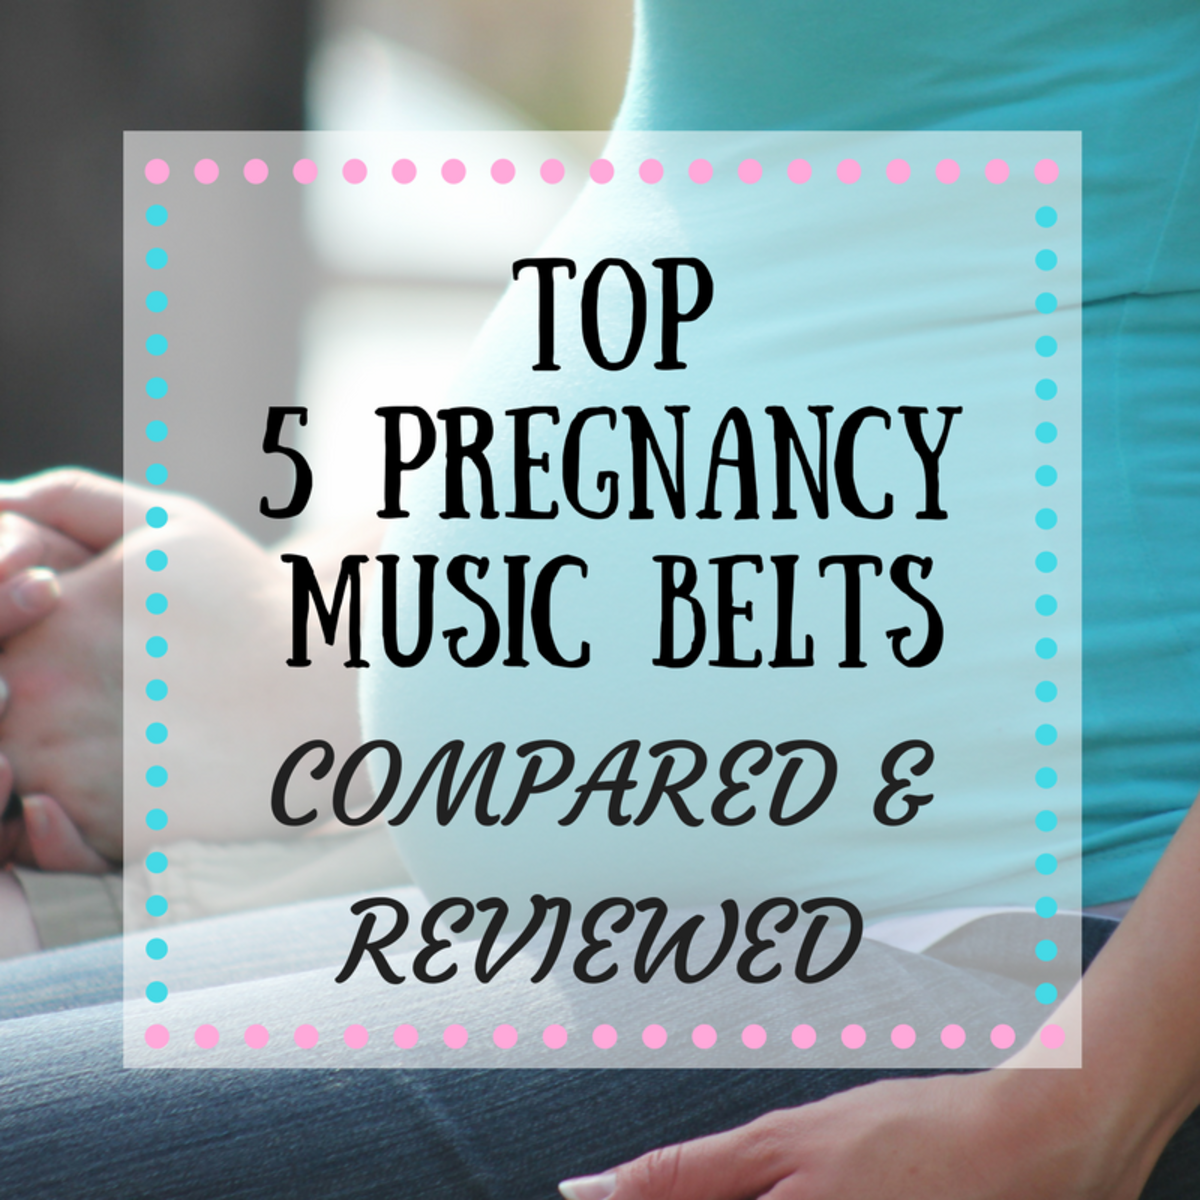 Top 5 Pregnancy Music Belts Compared & Reviewed